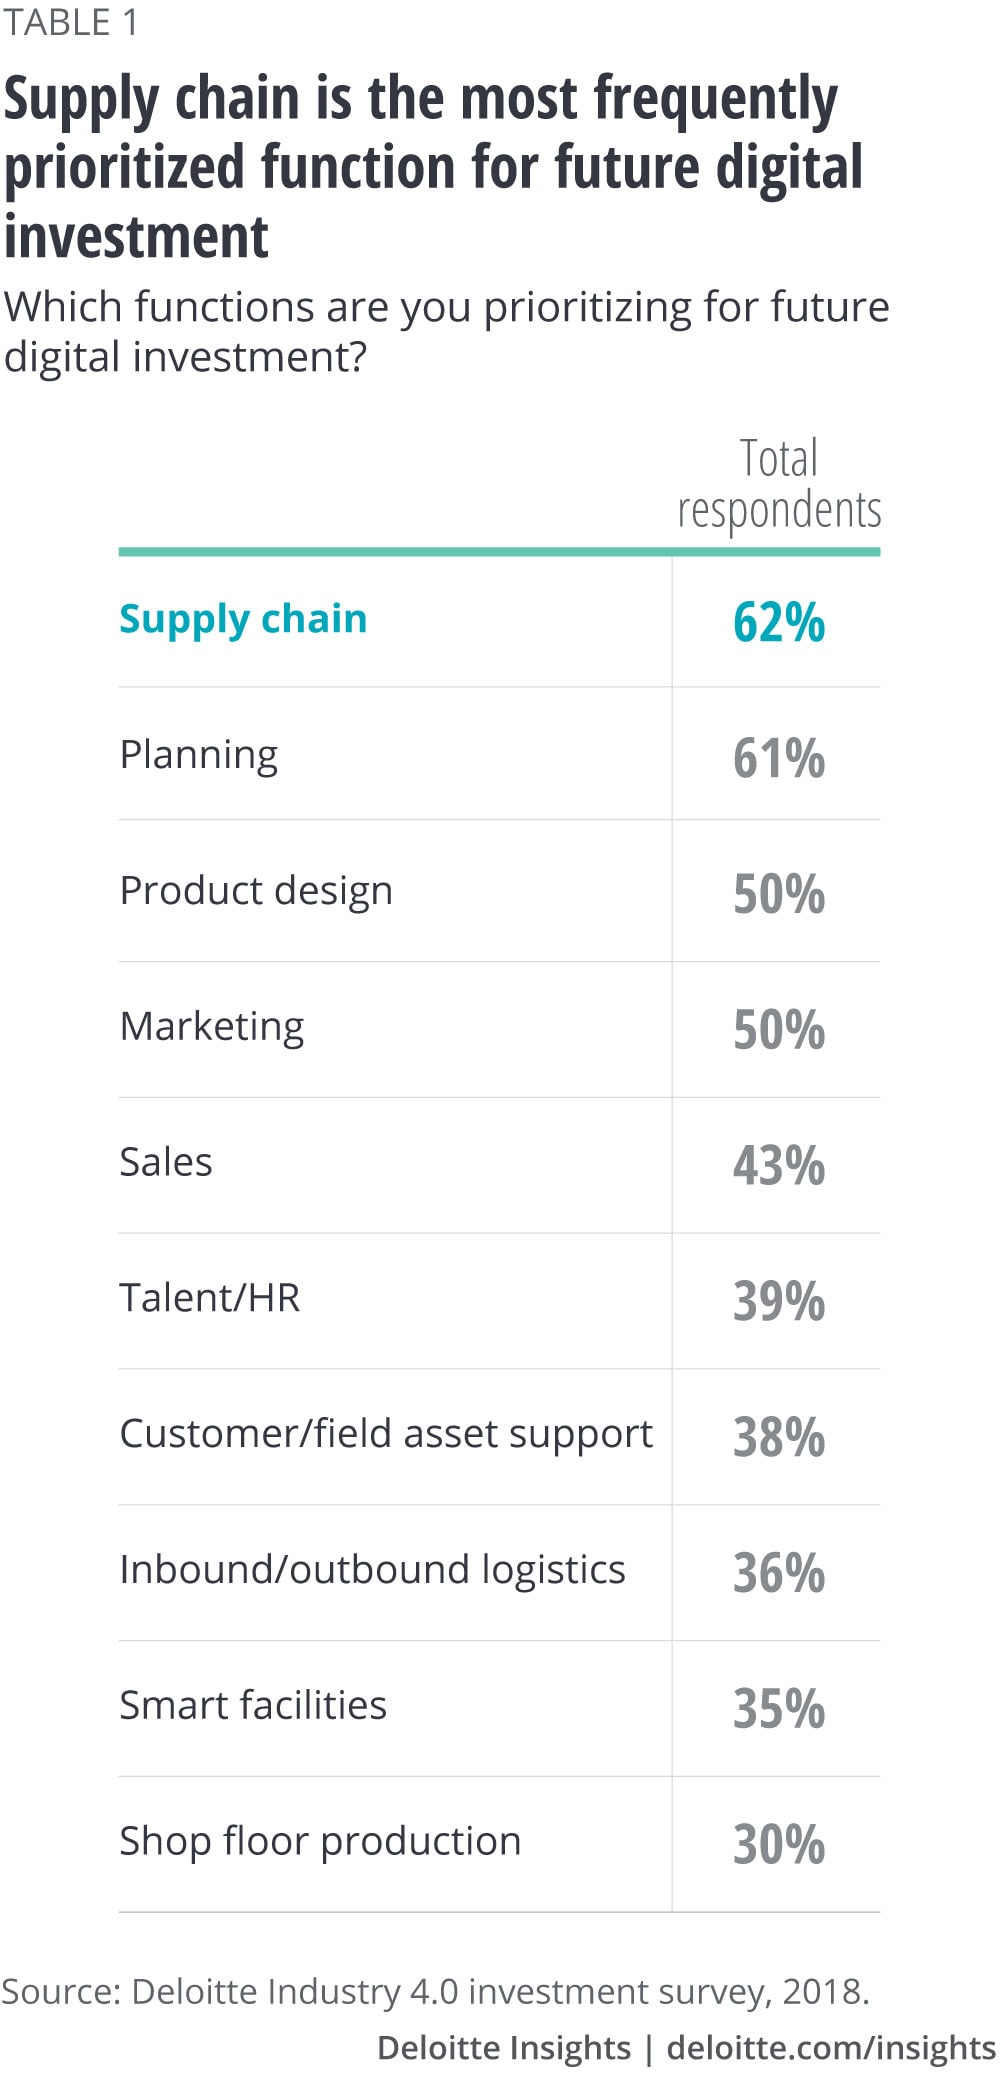 Supply chain is the most frequently prioritized function for future digital investment